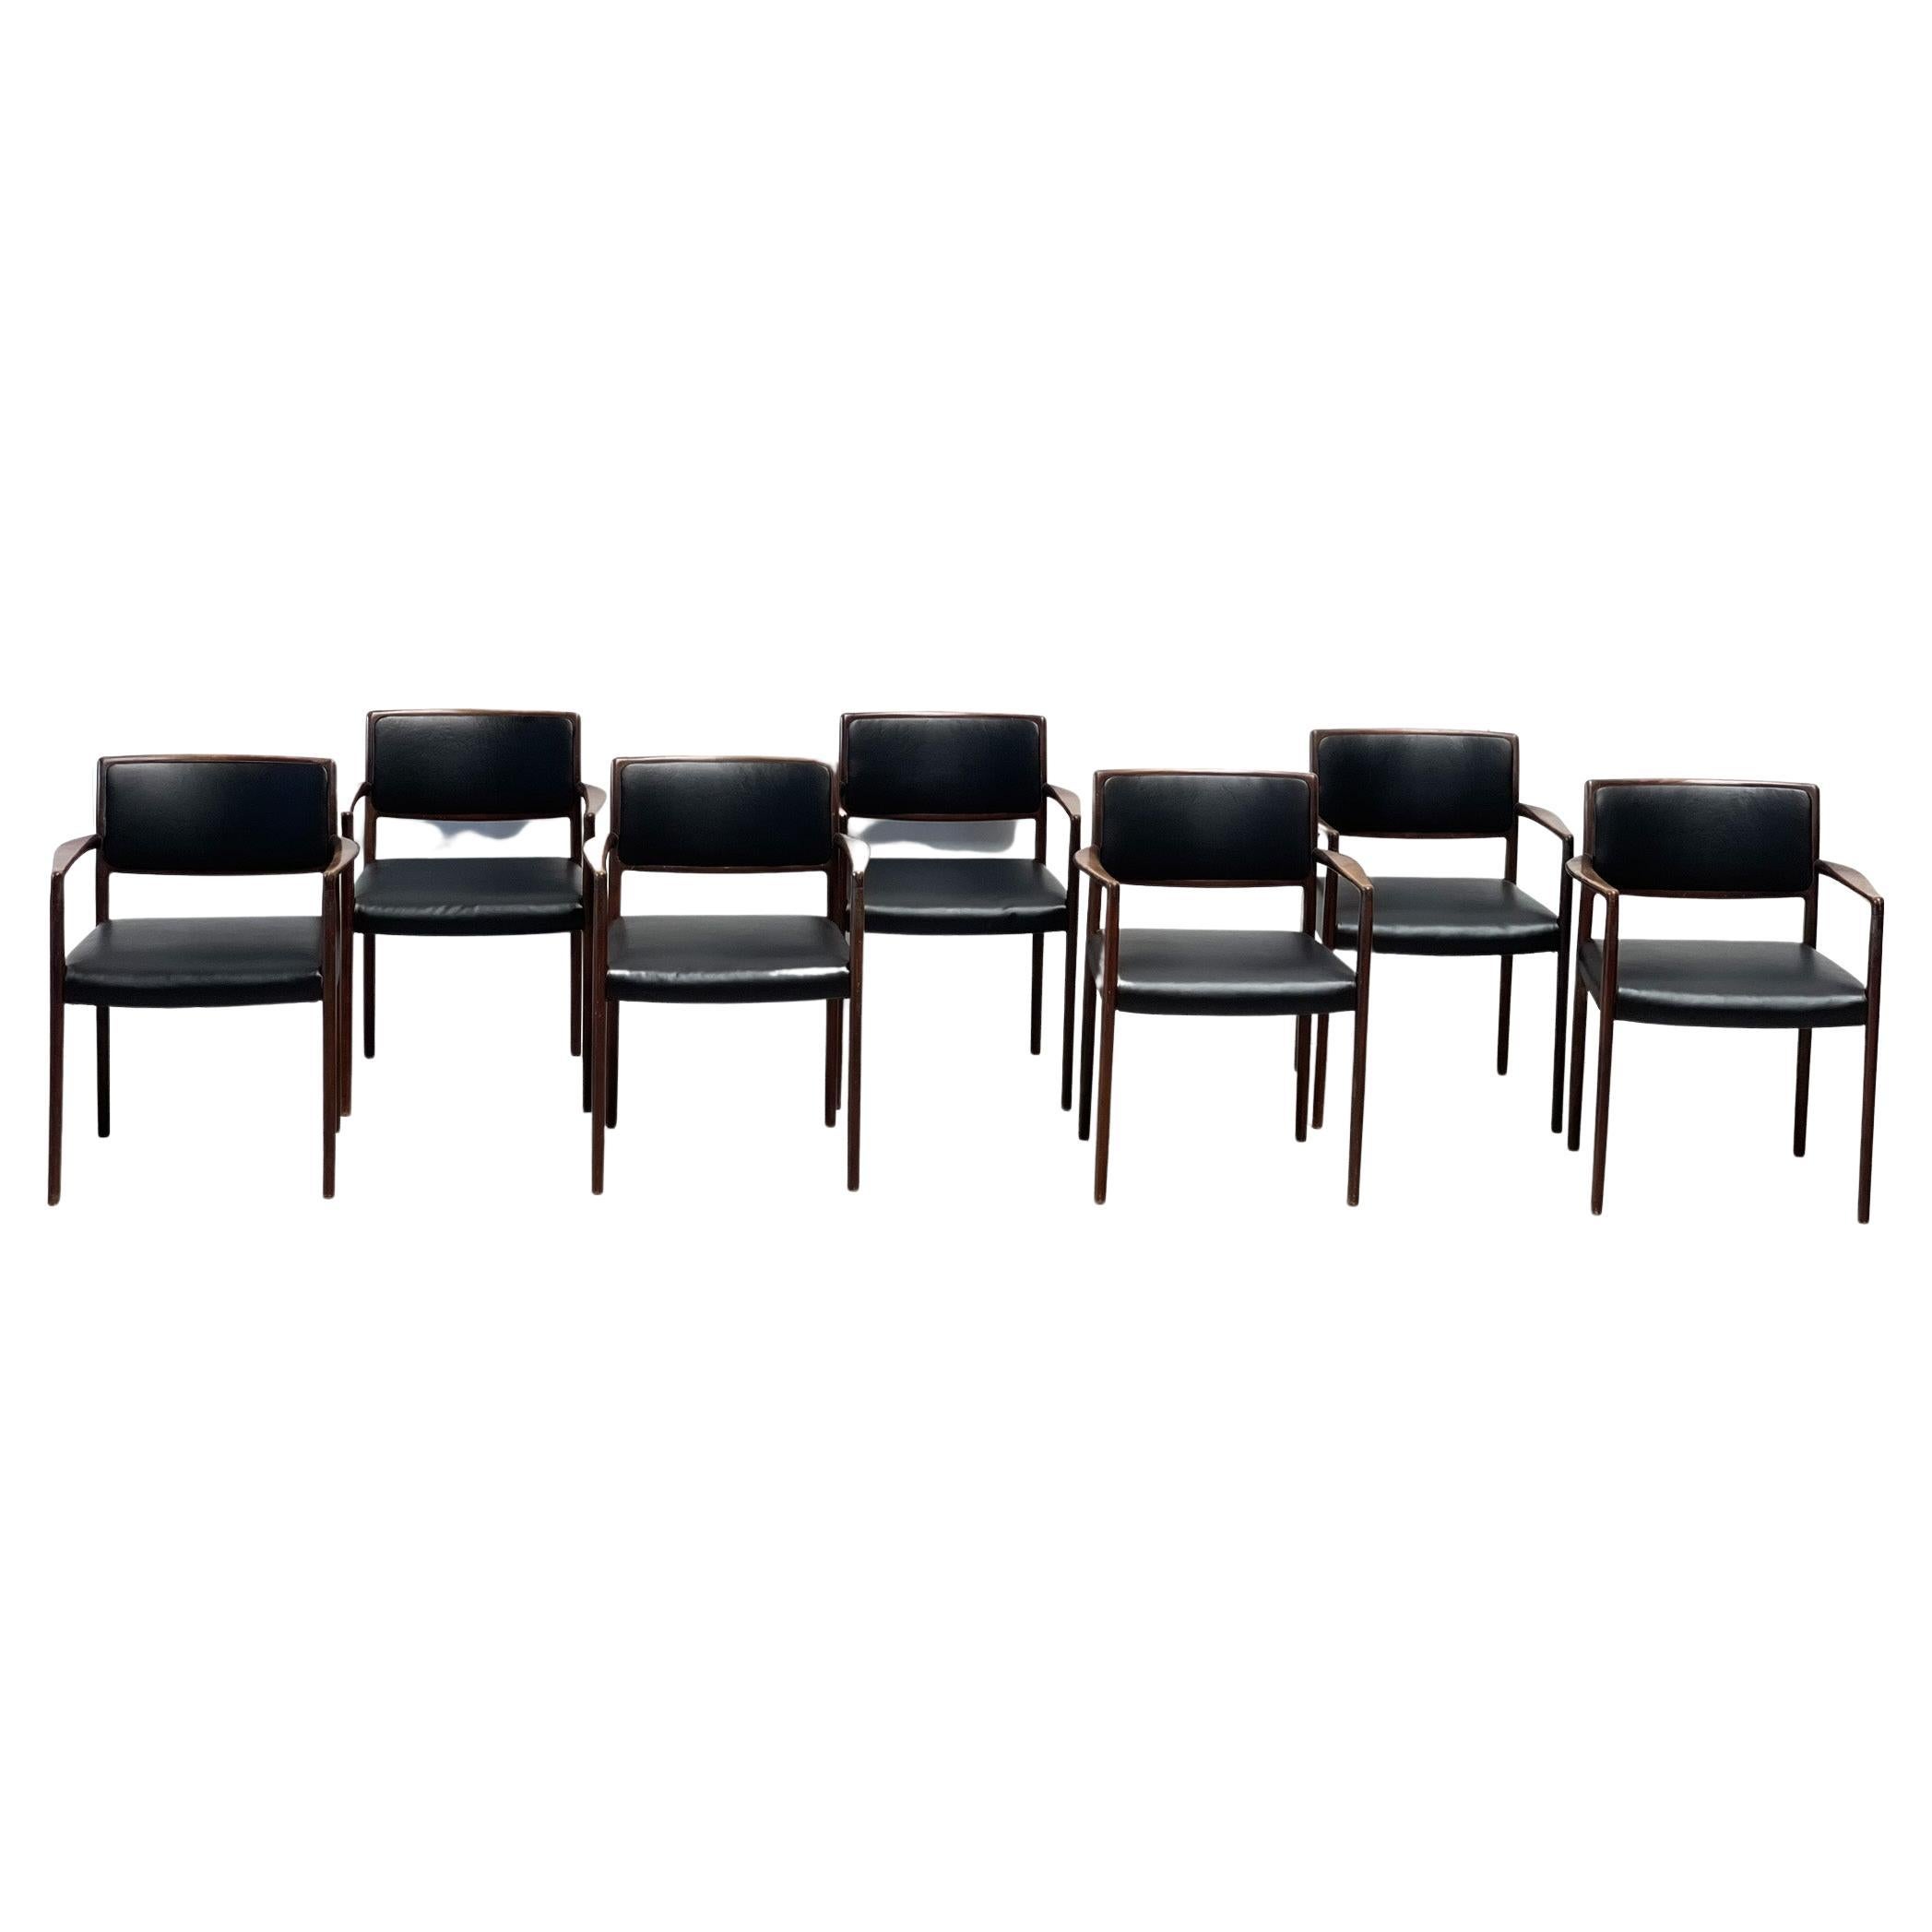 7 dining chairs attr. to Niels Moller